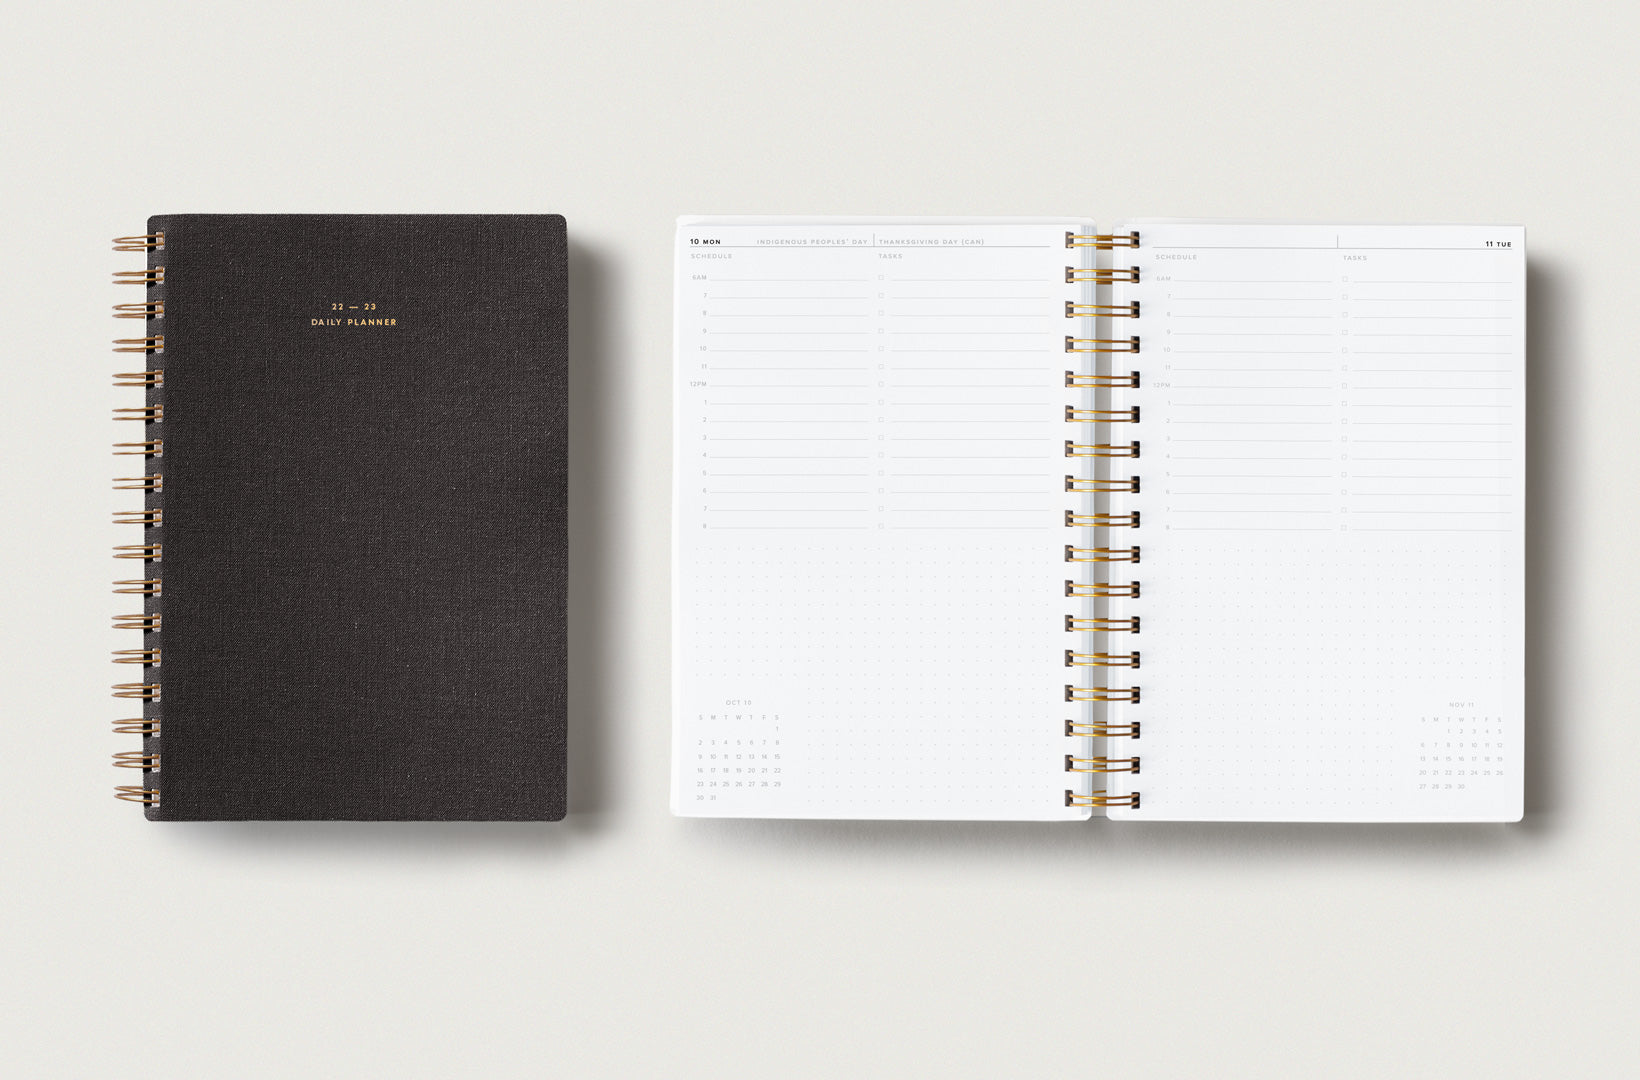 Two new 22-23 Wire Daily Planners sit on top of a light beige background. One is closed showing the textured Charcoal Gray bookcloth, and one lies open displaying the hourly daily format with room for notes